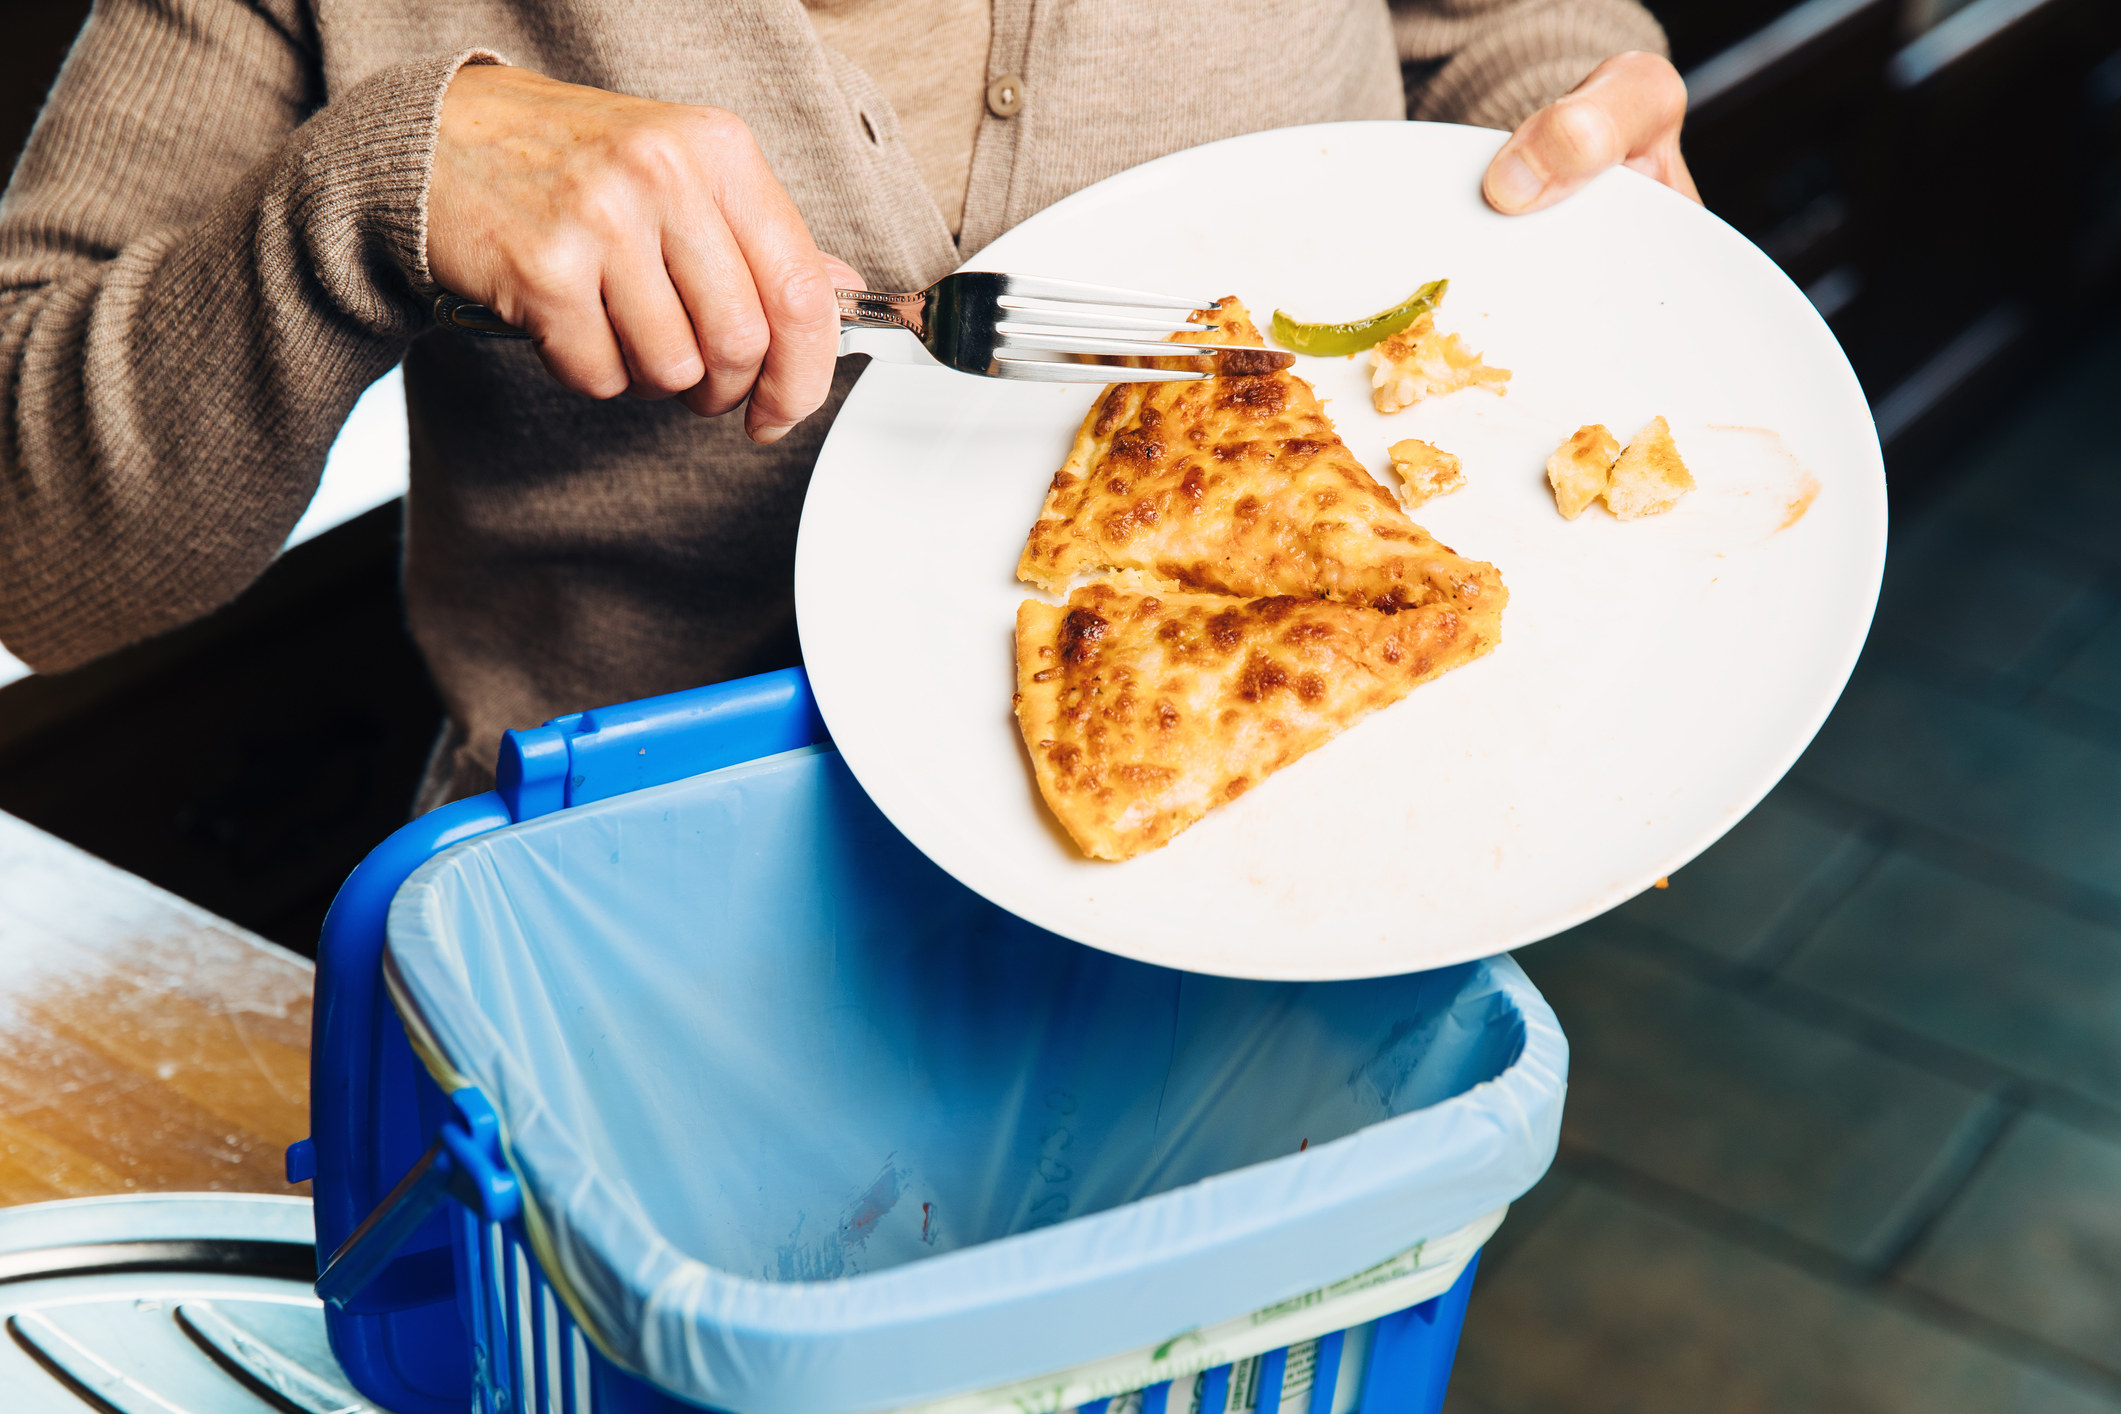 A person throwing pizza in the garbage can